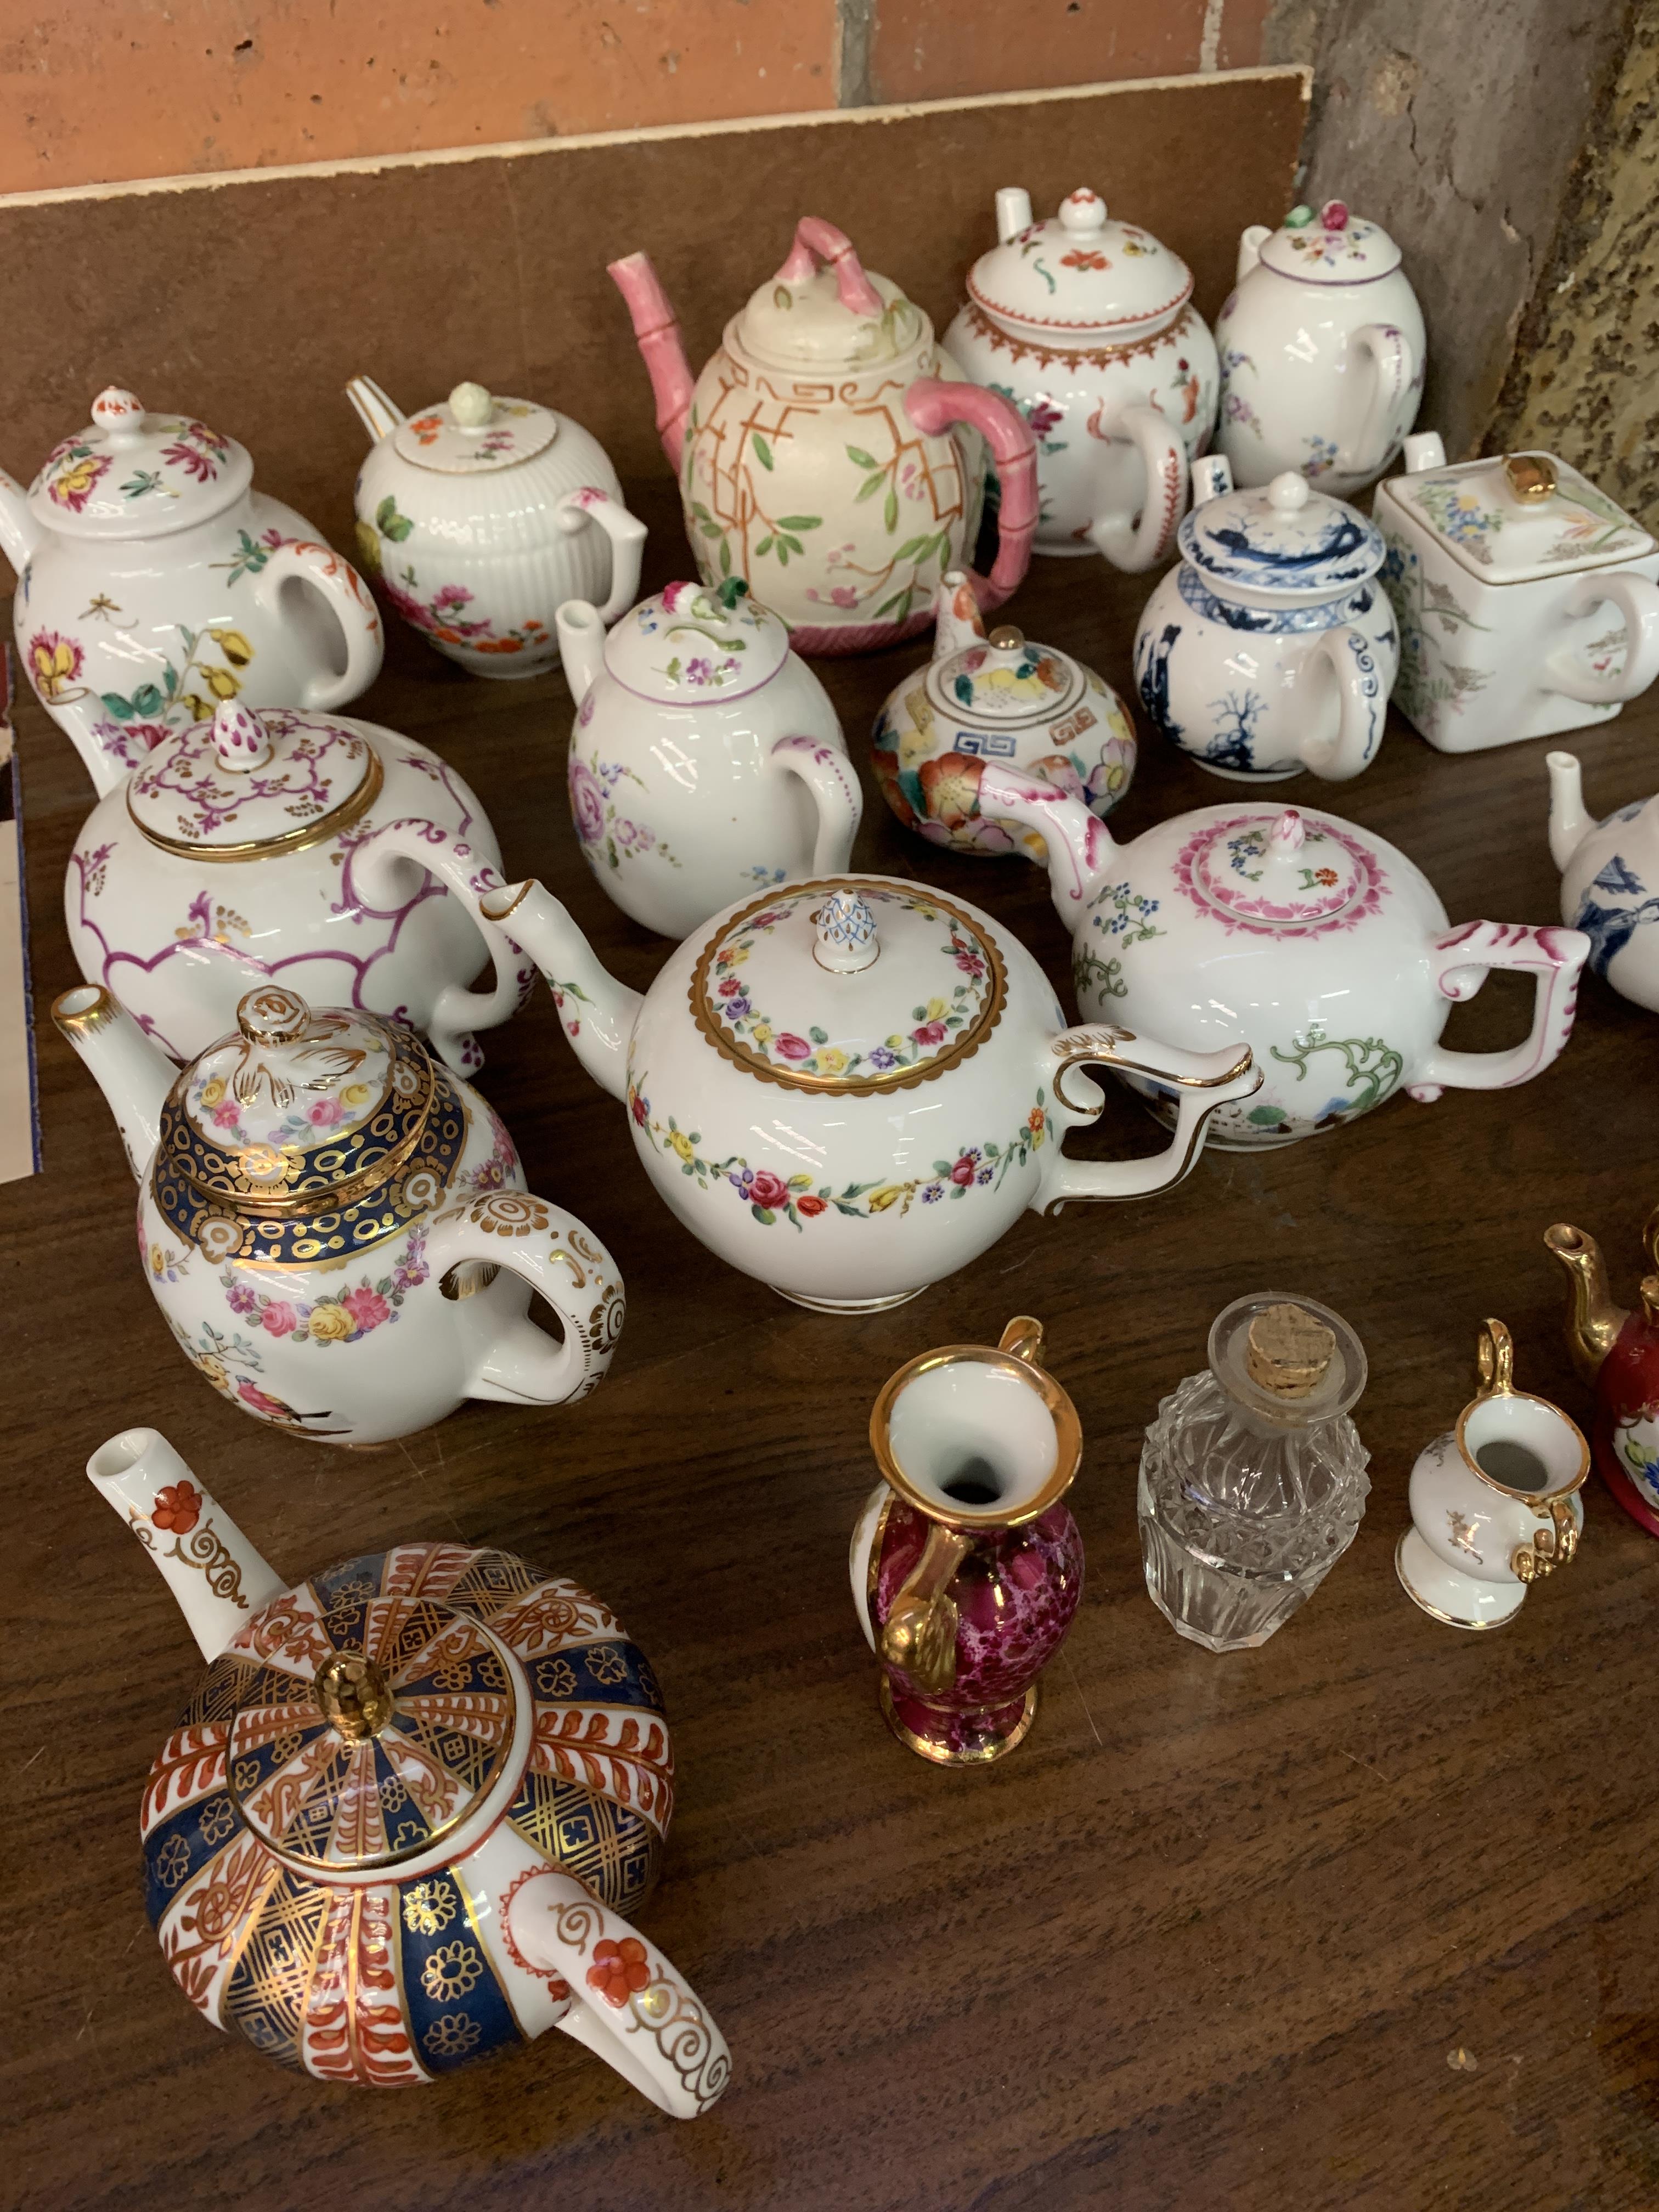 Victoria and Albert Museum porcelain teapot collection by Franklin Mint - Image 9 of 9